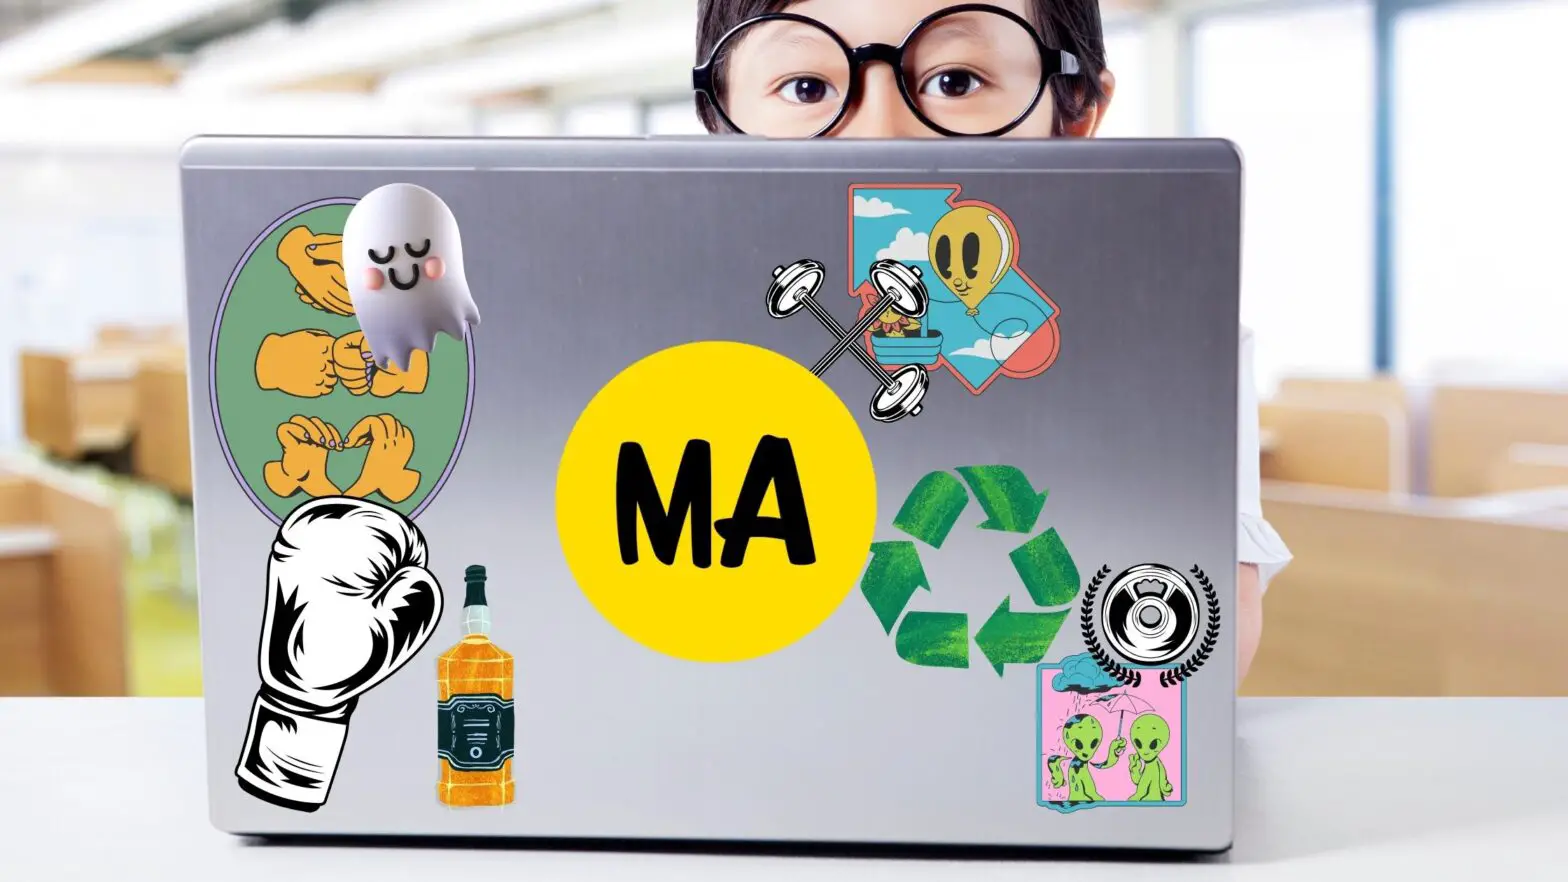 Are Stickers on a Laptop Unprofessional?